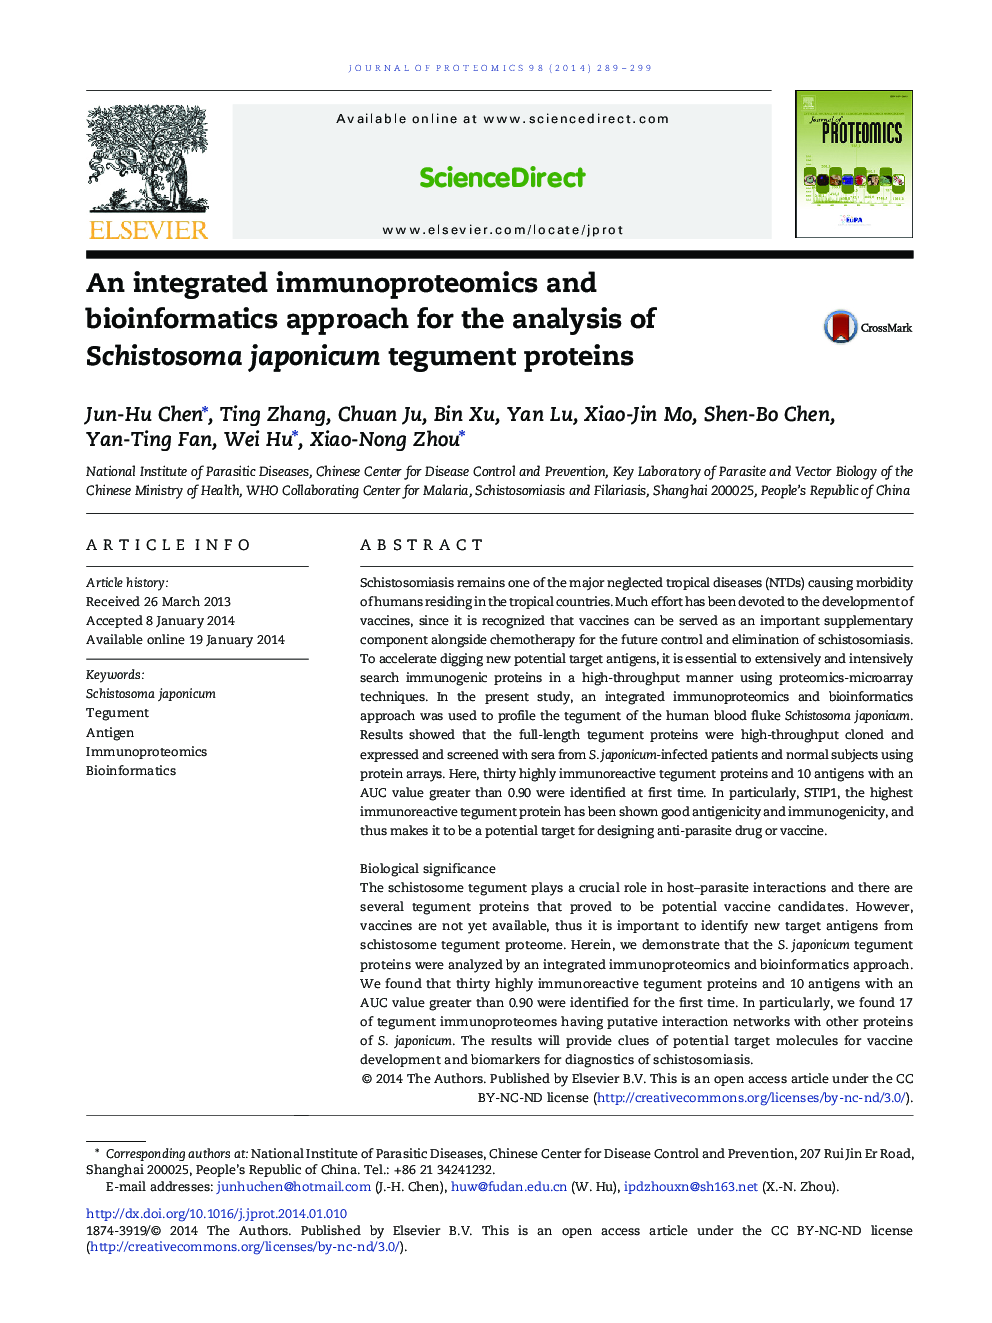 An integrated immunoproteomics and bioinformatics approach for the analysis of Schistosoma japonicum tegument proteins